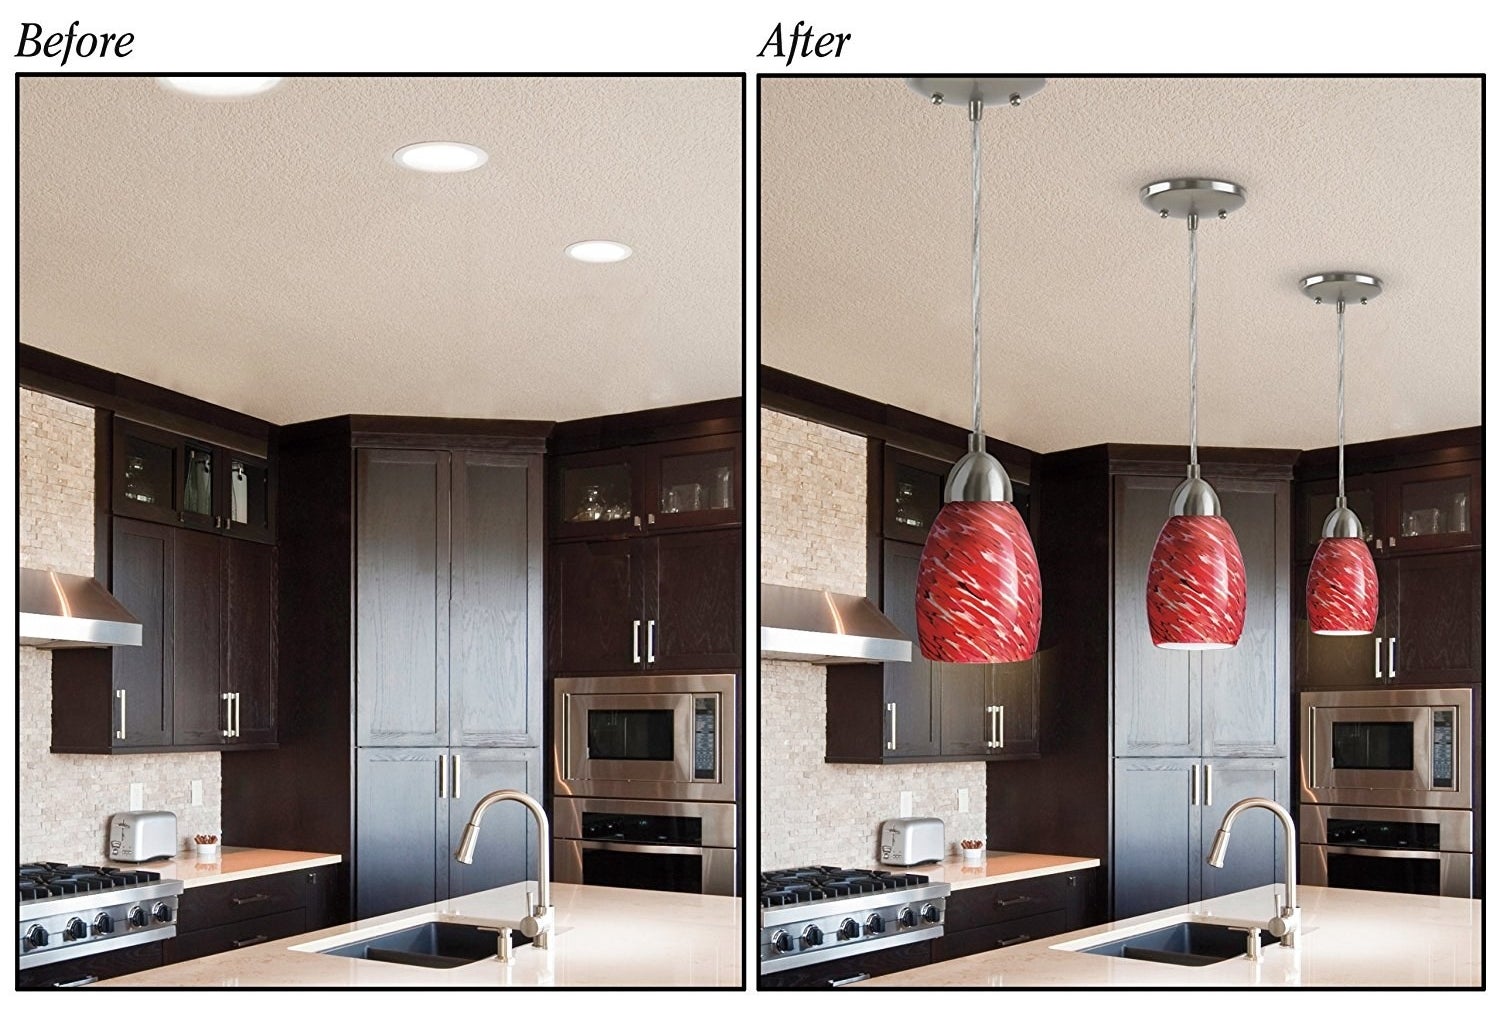 A display showing recess lighting that has been converted to pendant style lighting with red light shades